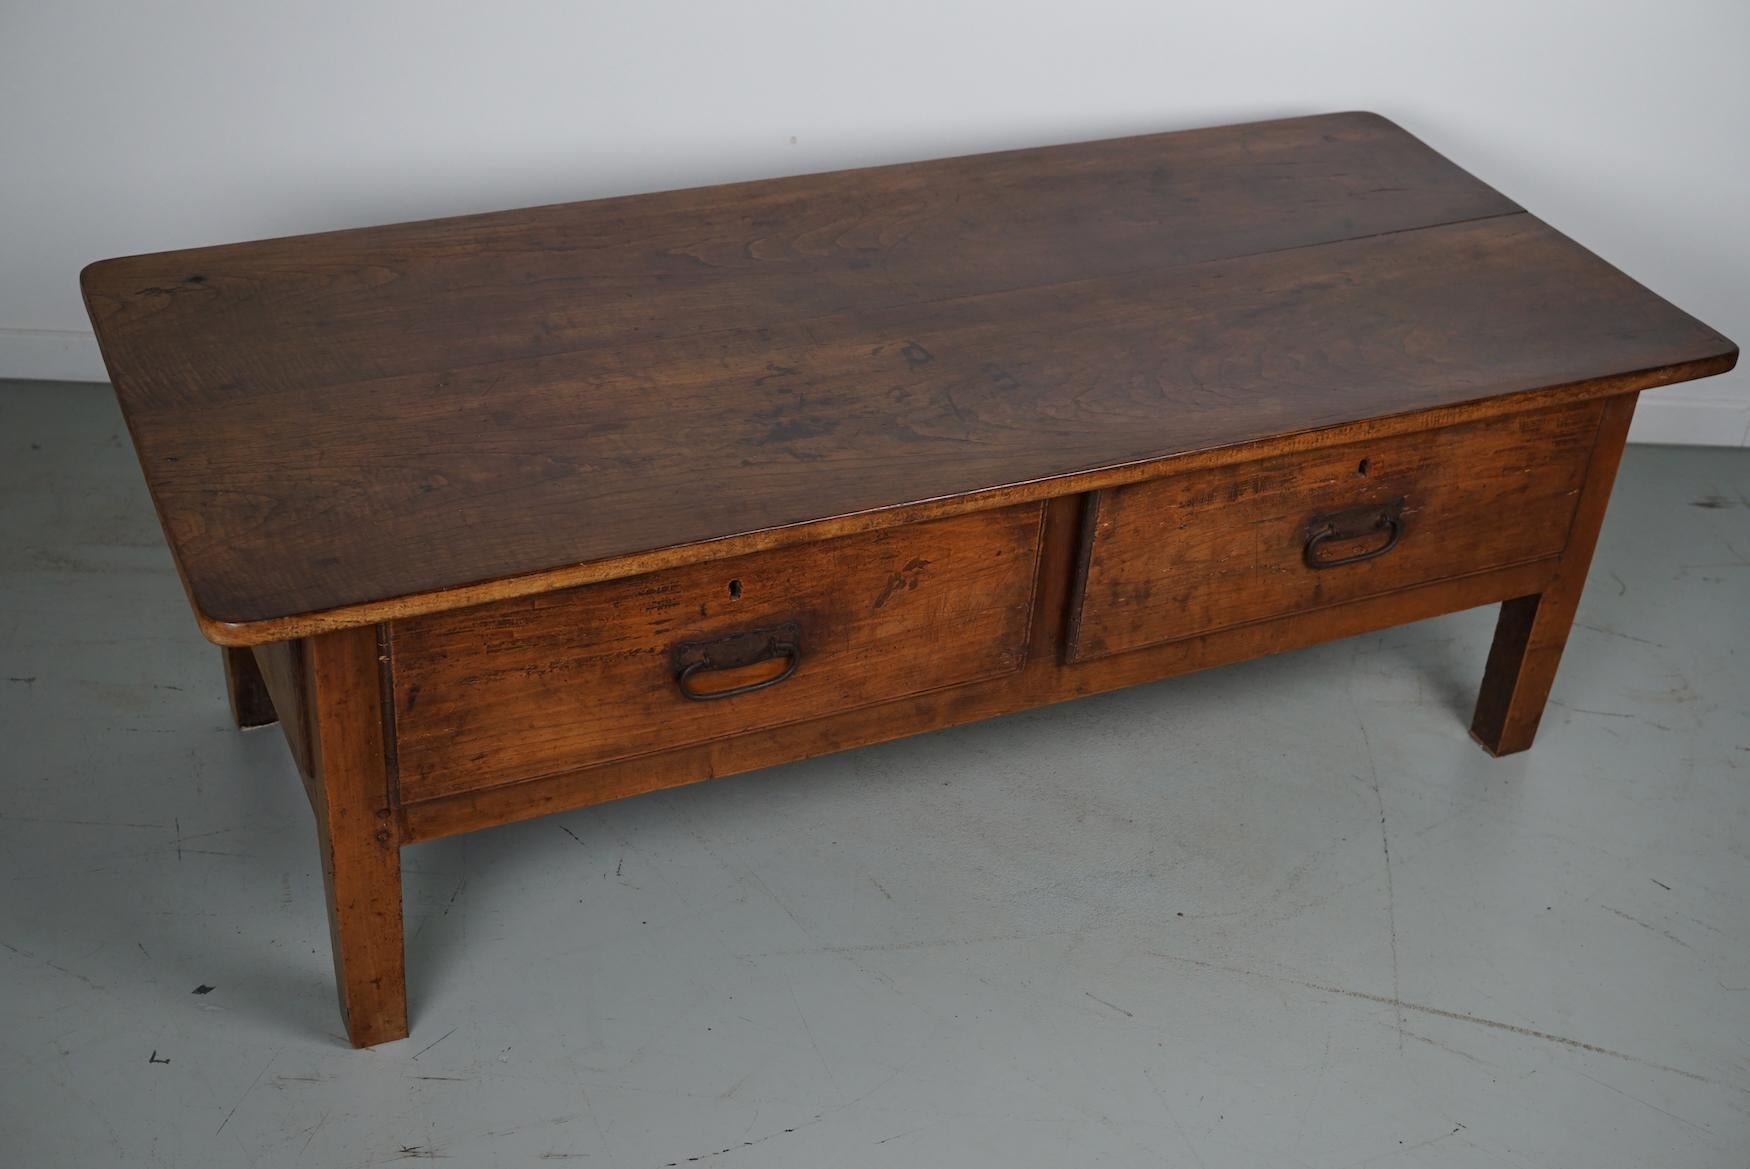 This coffee table was converted from an old 18th century chestnut farmhouse prepping table. It retained a very nice patina and rich color / fading over the years and has a practical size with large drawers.